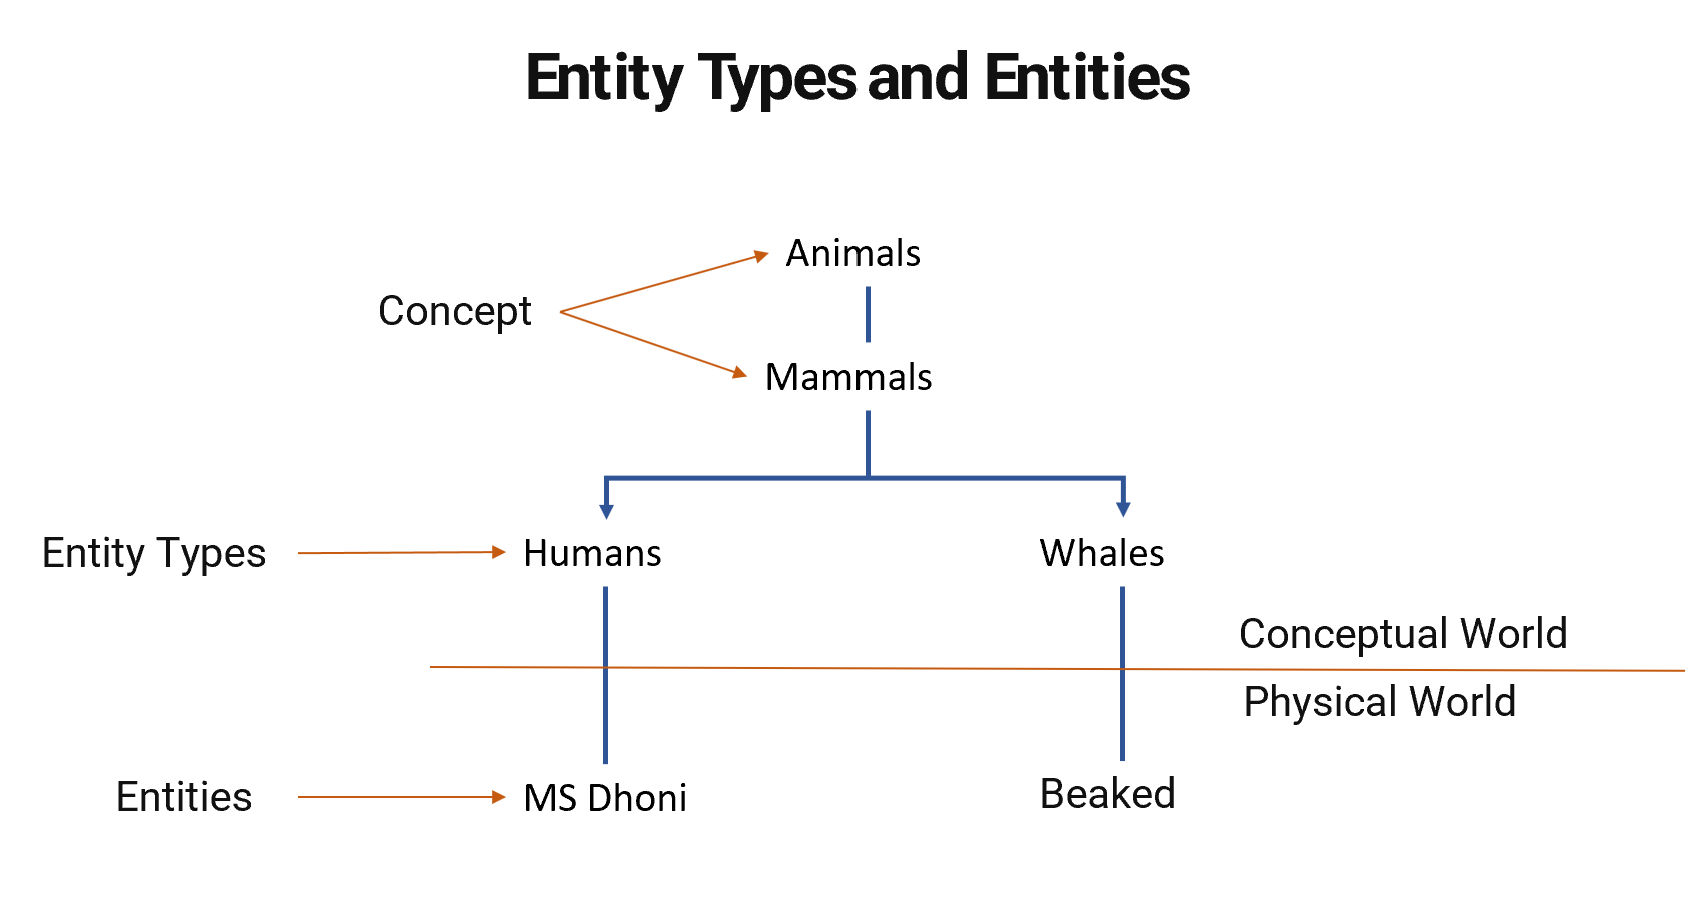 Entity types and entities